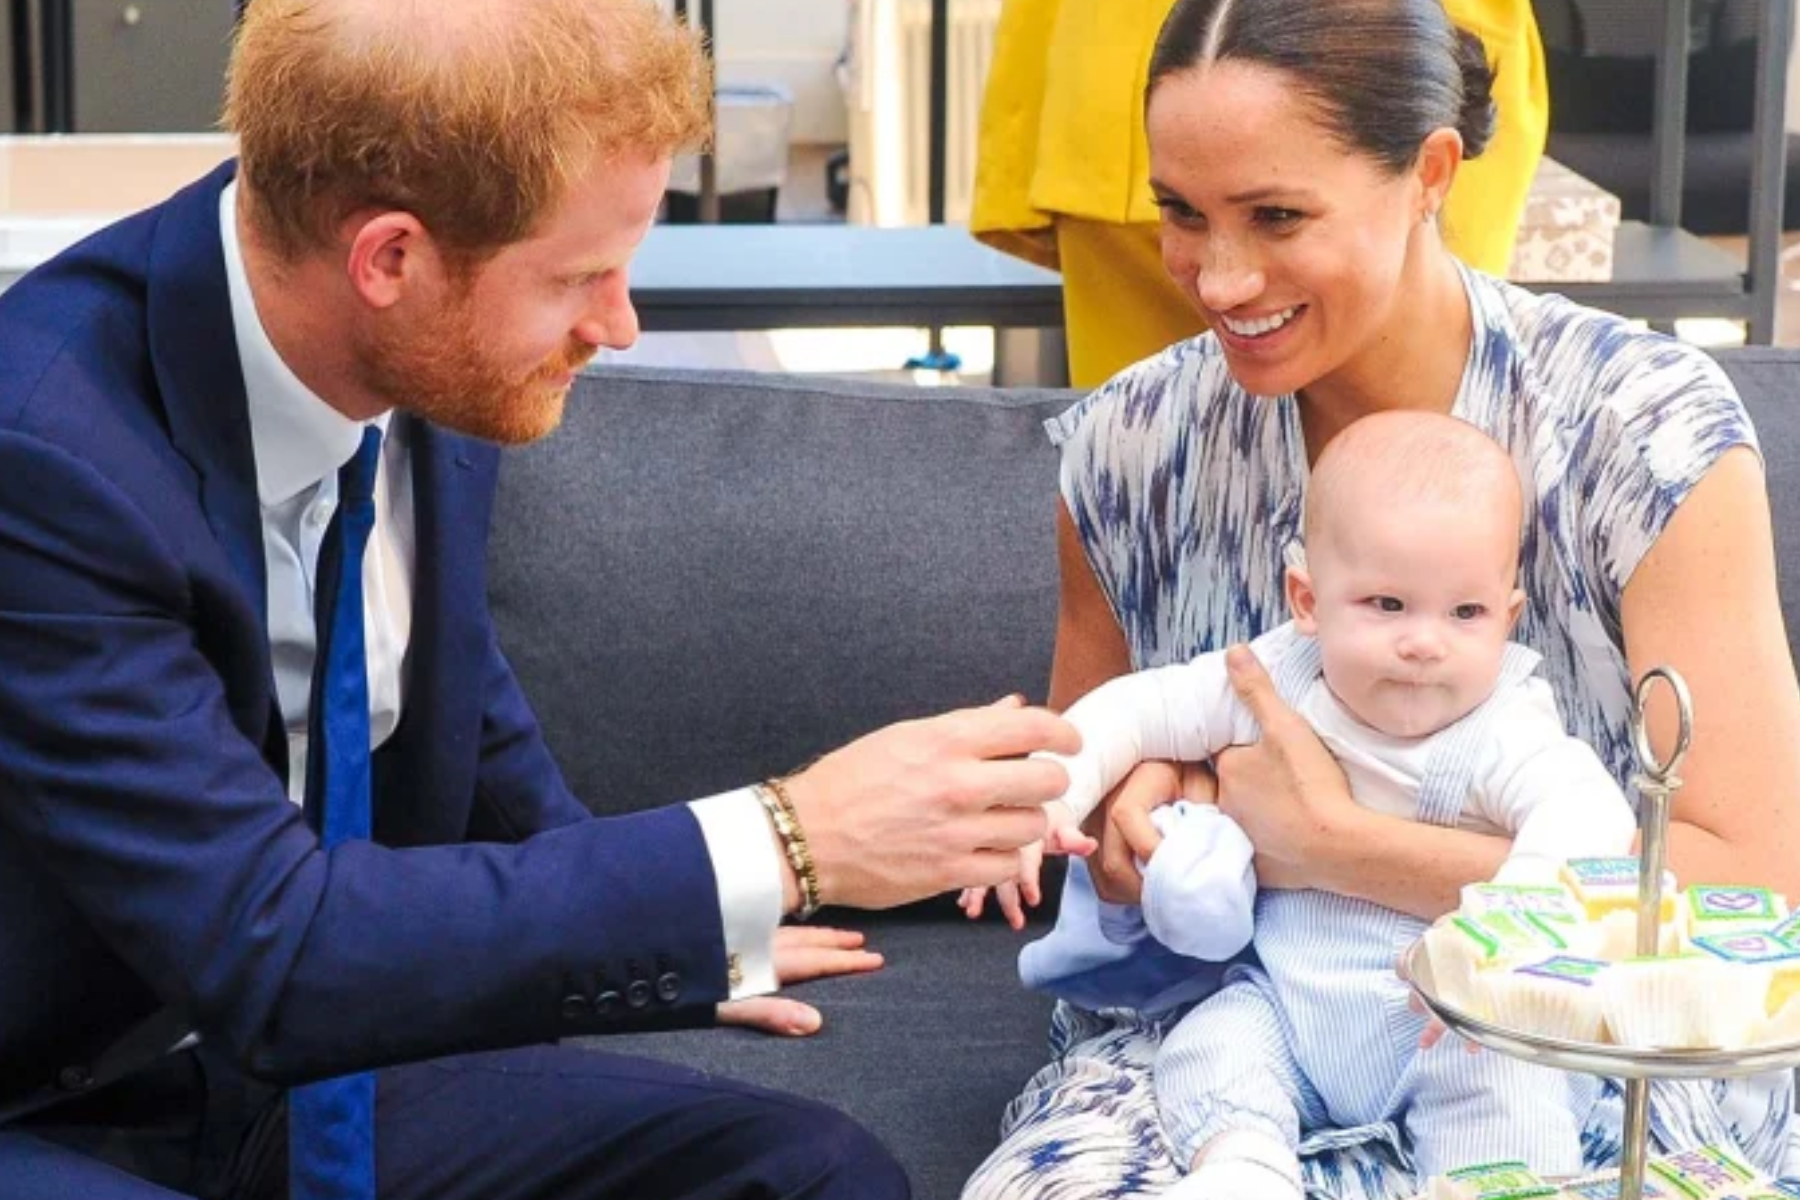 While sitting on a sofa, Prince Harry and Meghan Markle hold their baby